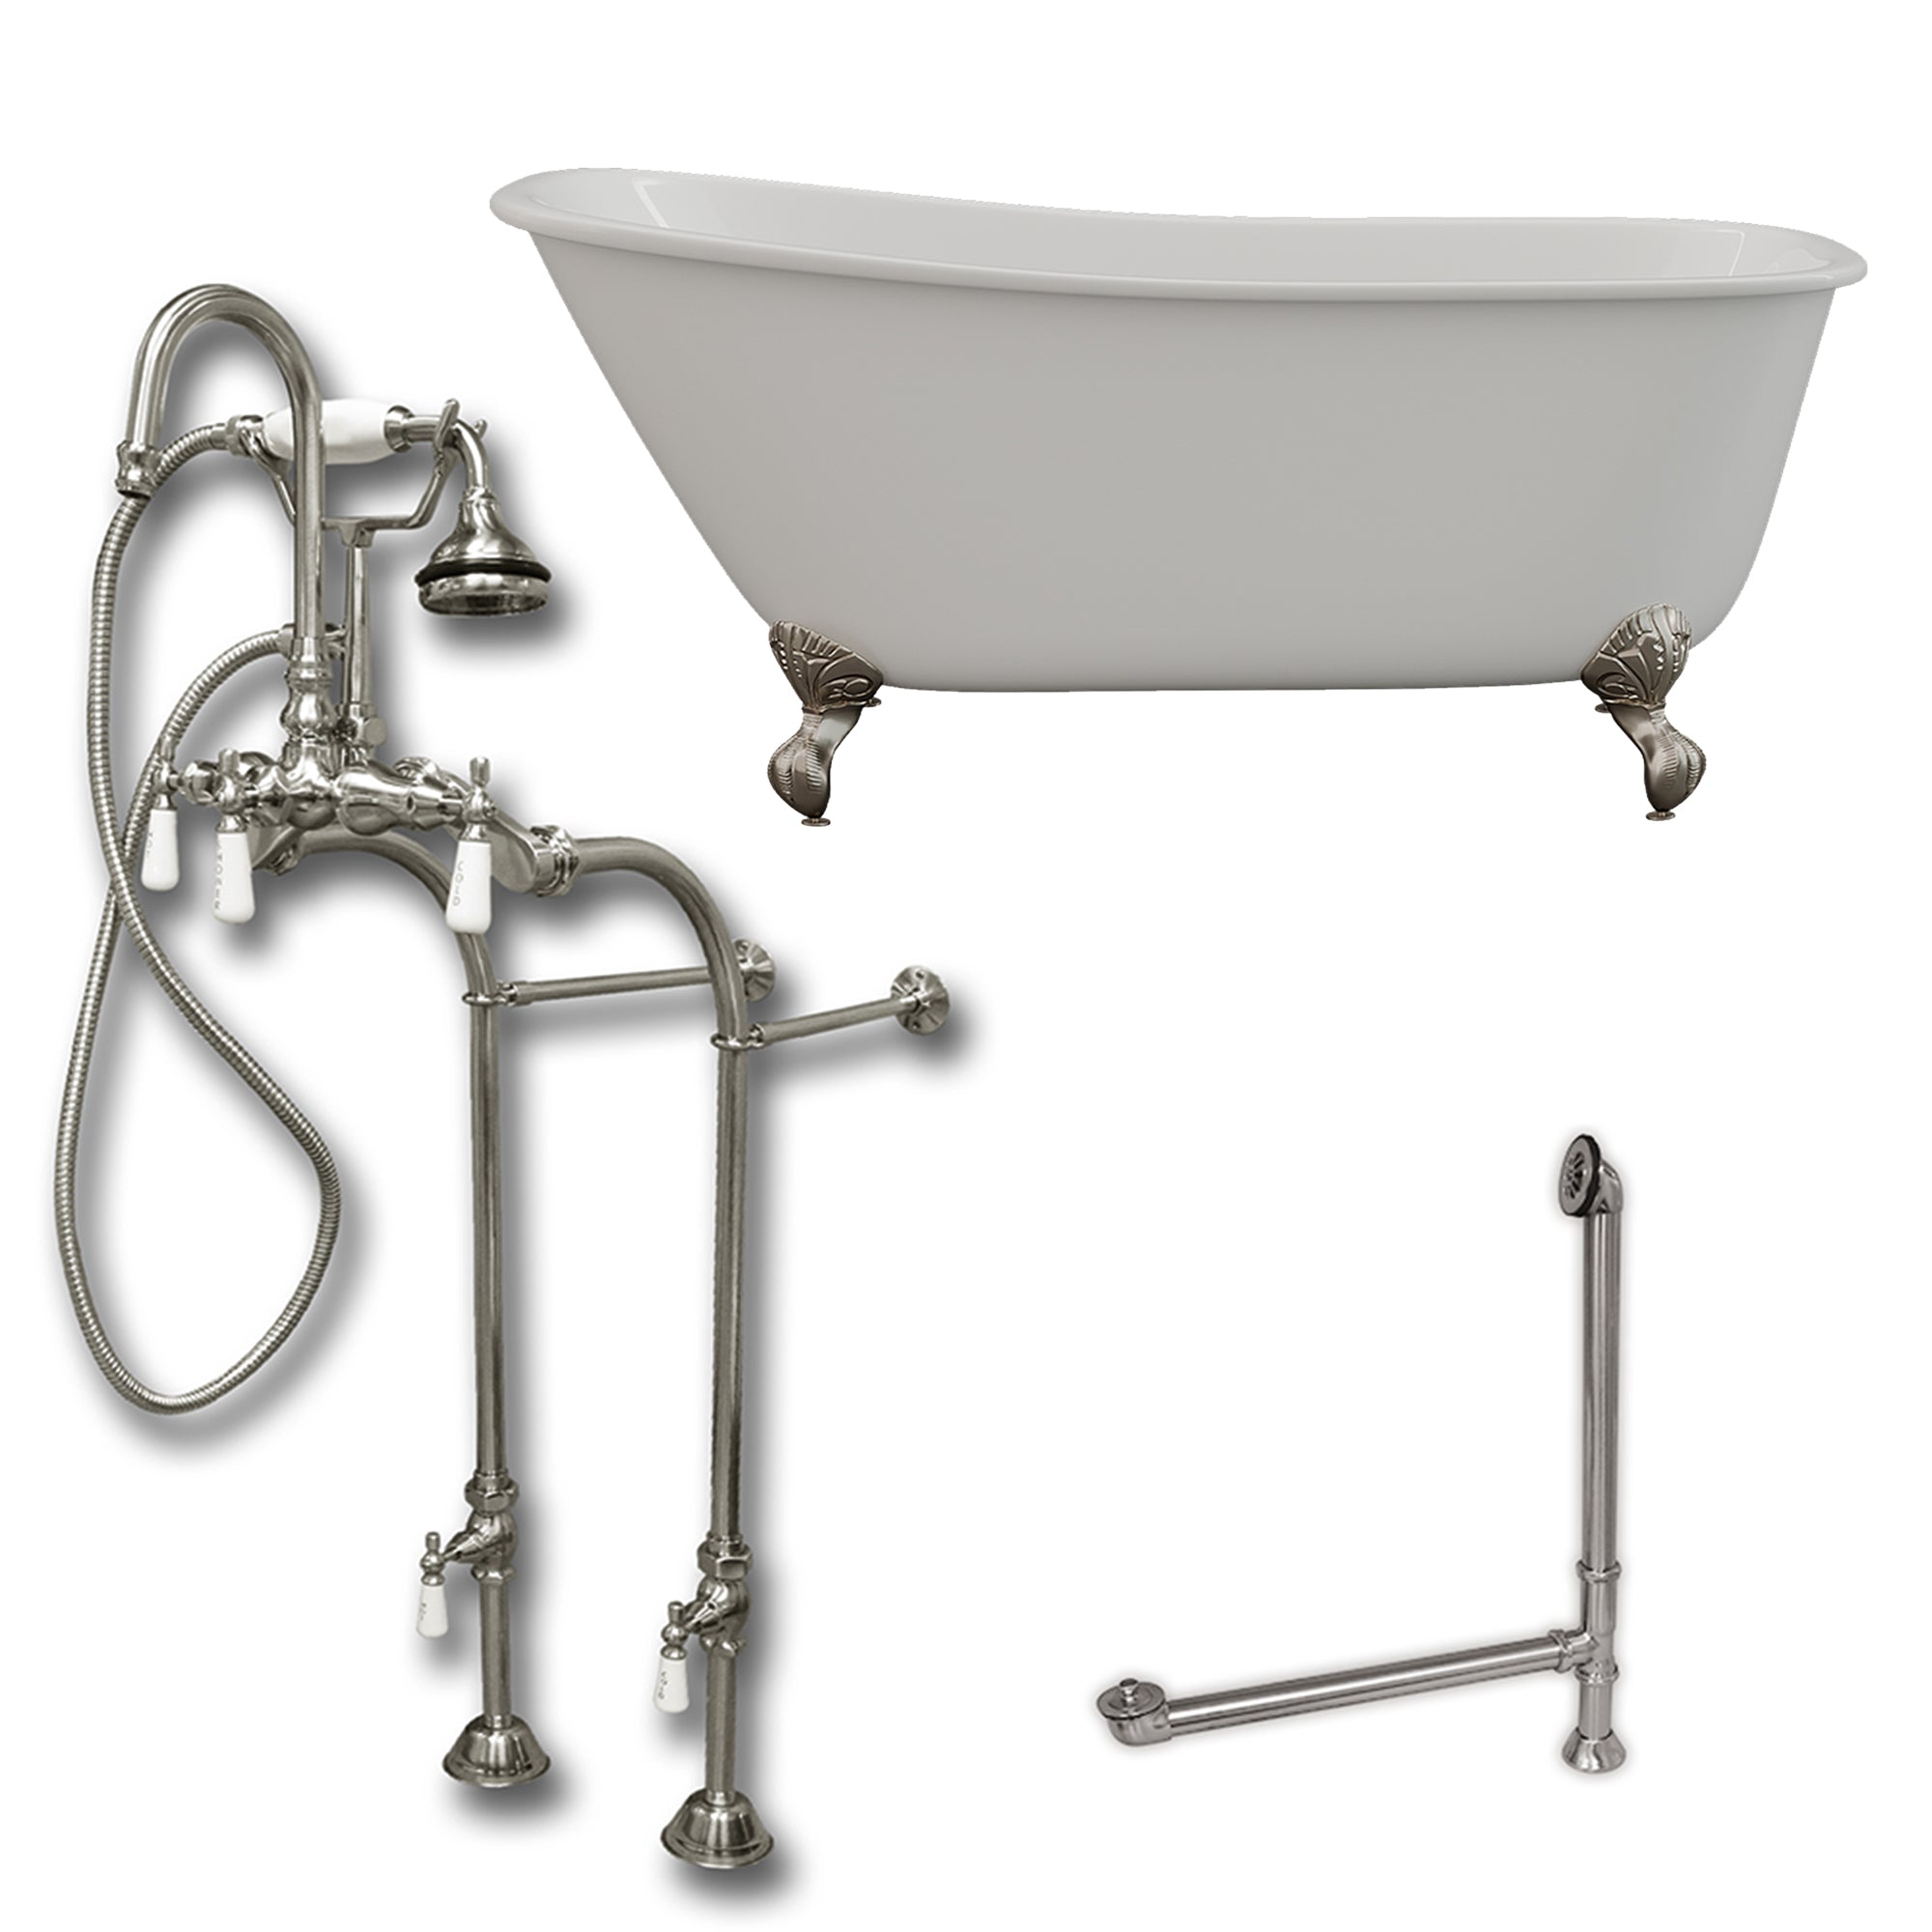 Cambridge Plumbing 58-Inch Swedish Slipper Cast Iron Clawfoot Tub (Luxurious Porcelain Enamel Interior) with Freestanding Plumbing Package - Brushed Nickel Ball and Claw Feet - SWED58-398684-PKG-NH - Vital Hydrotherapy